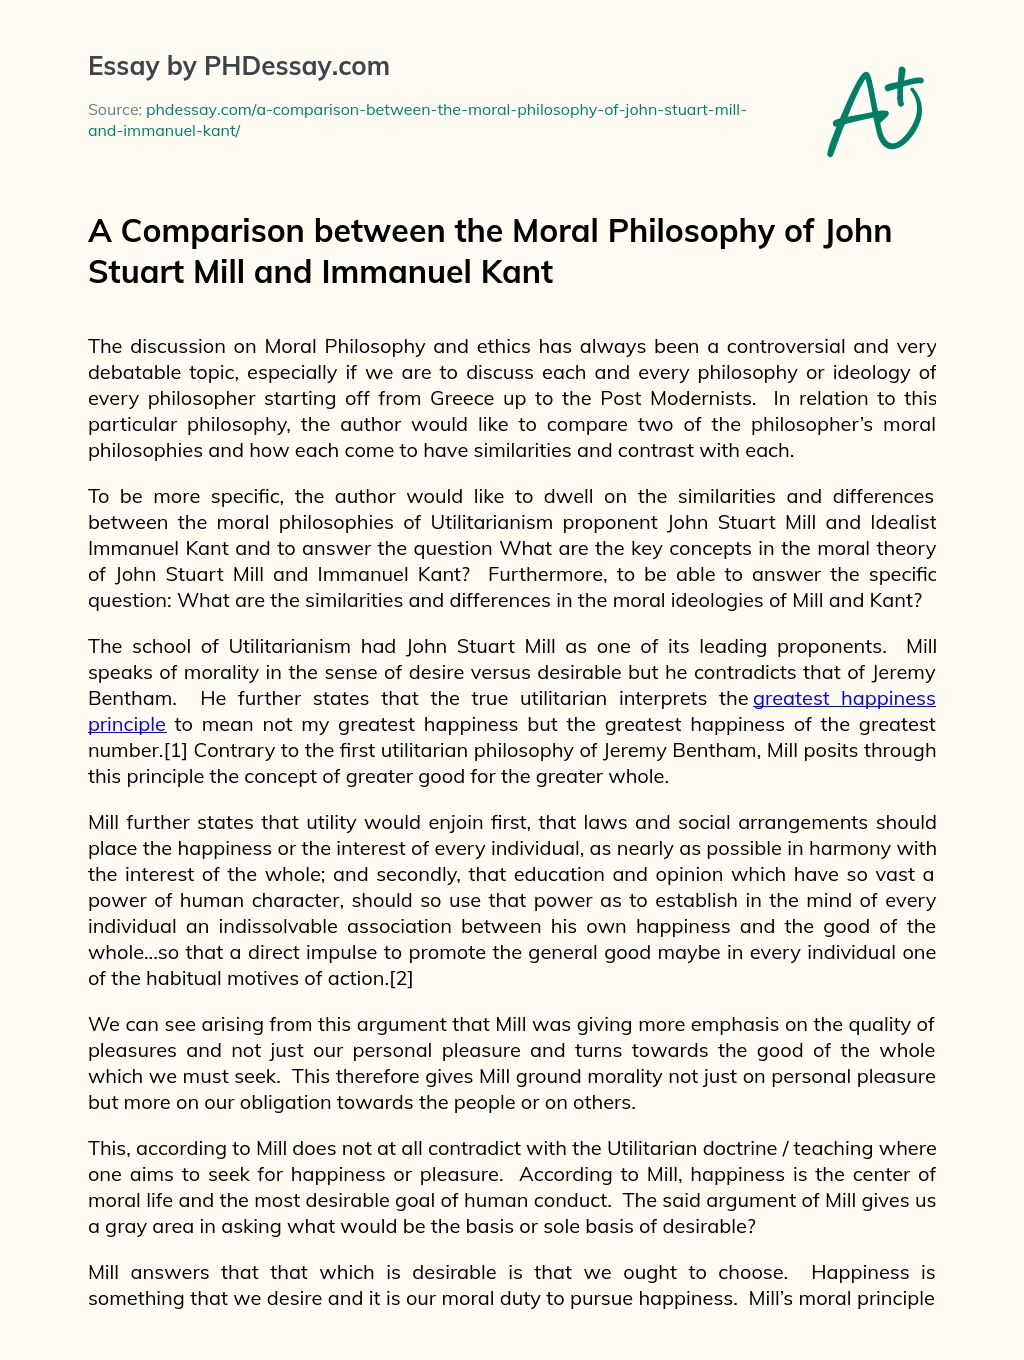 A Comparison between the Moral Philosophy of John Stuart Mill and Immanuel Kant essay